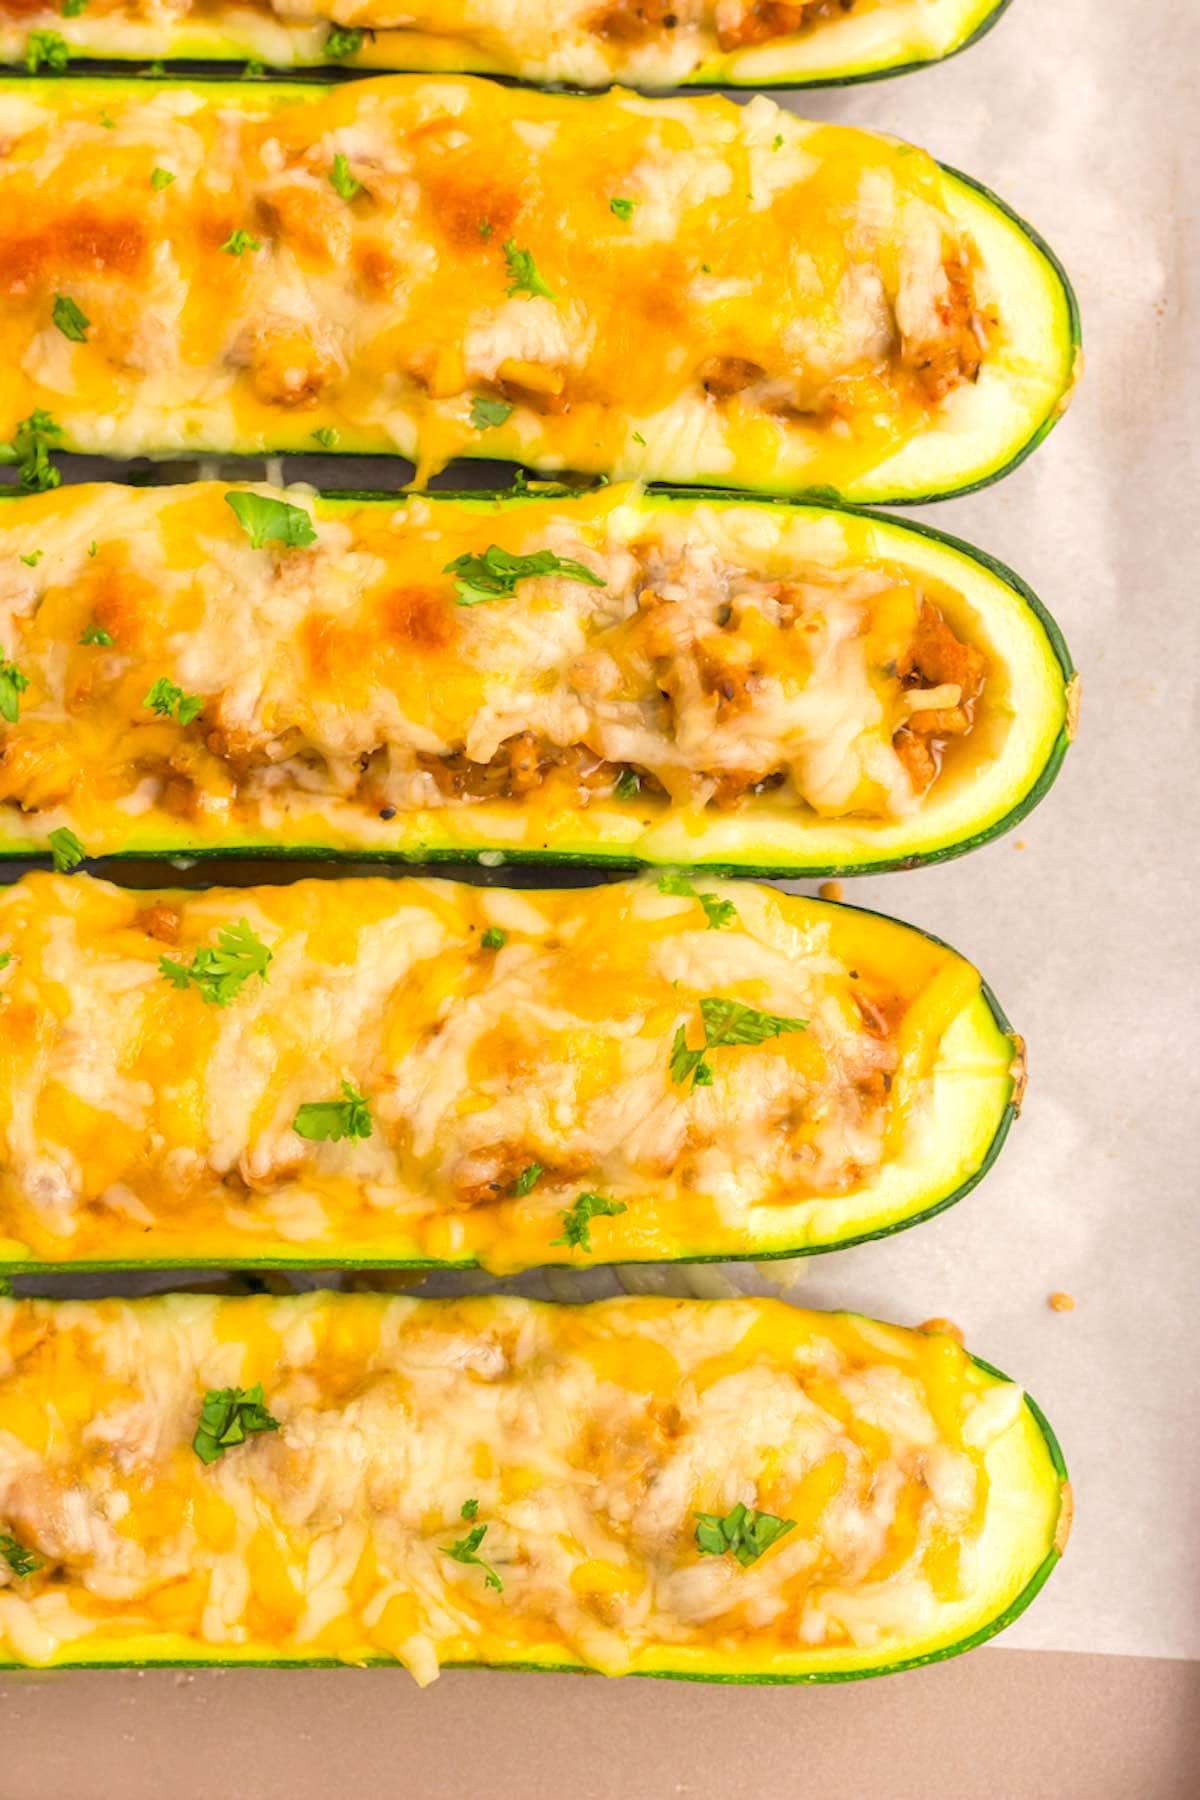 zucchini boats with ground turkey and cheese.